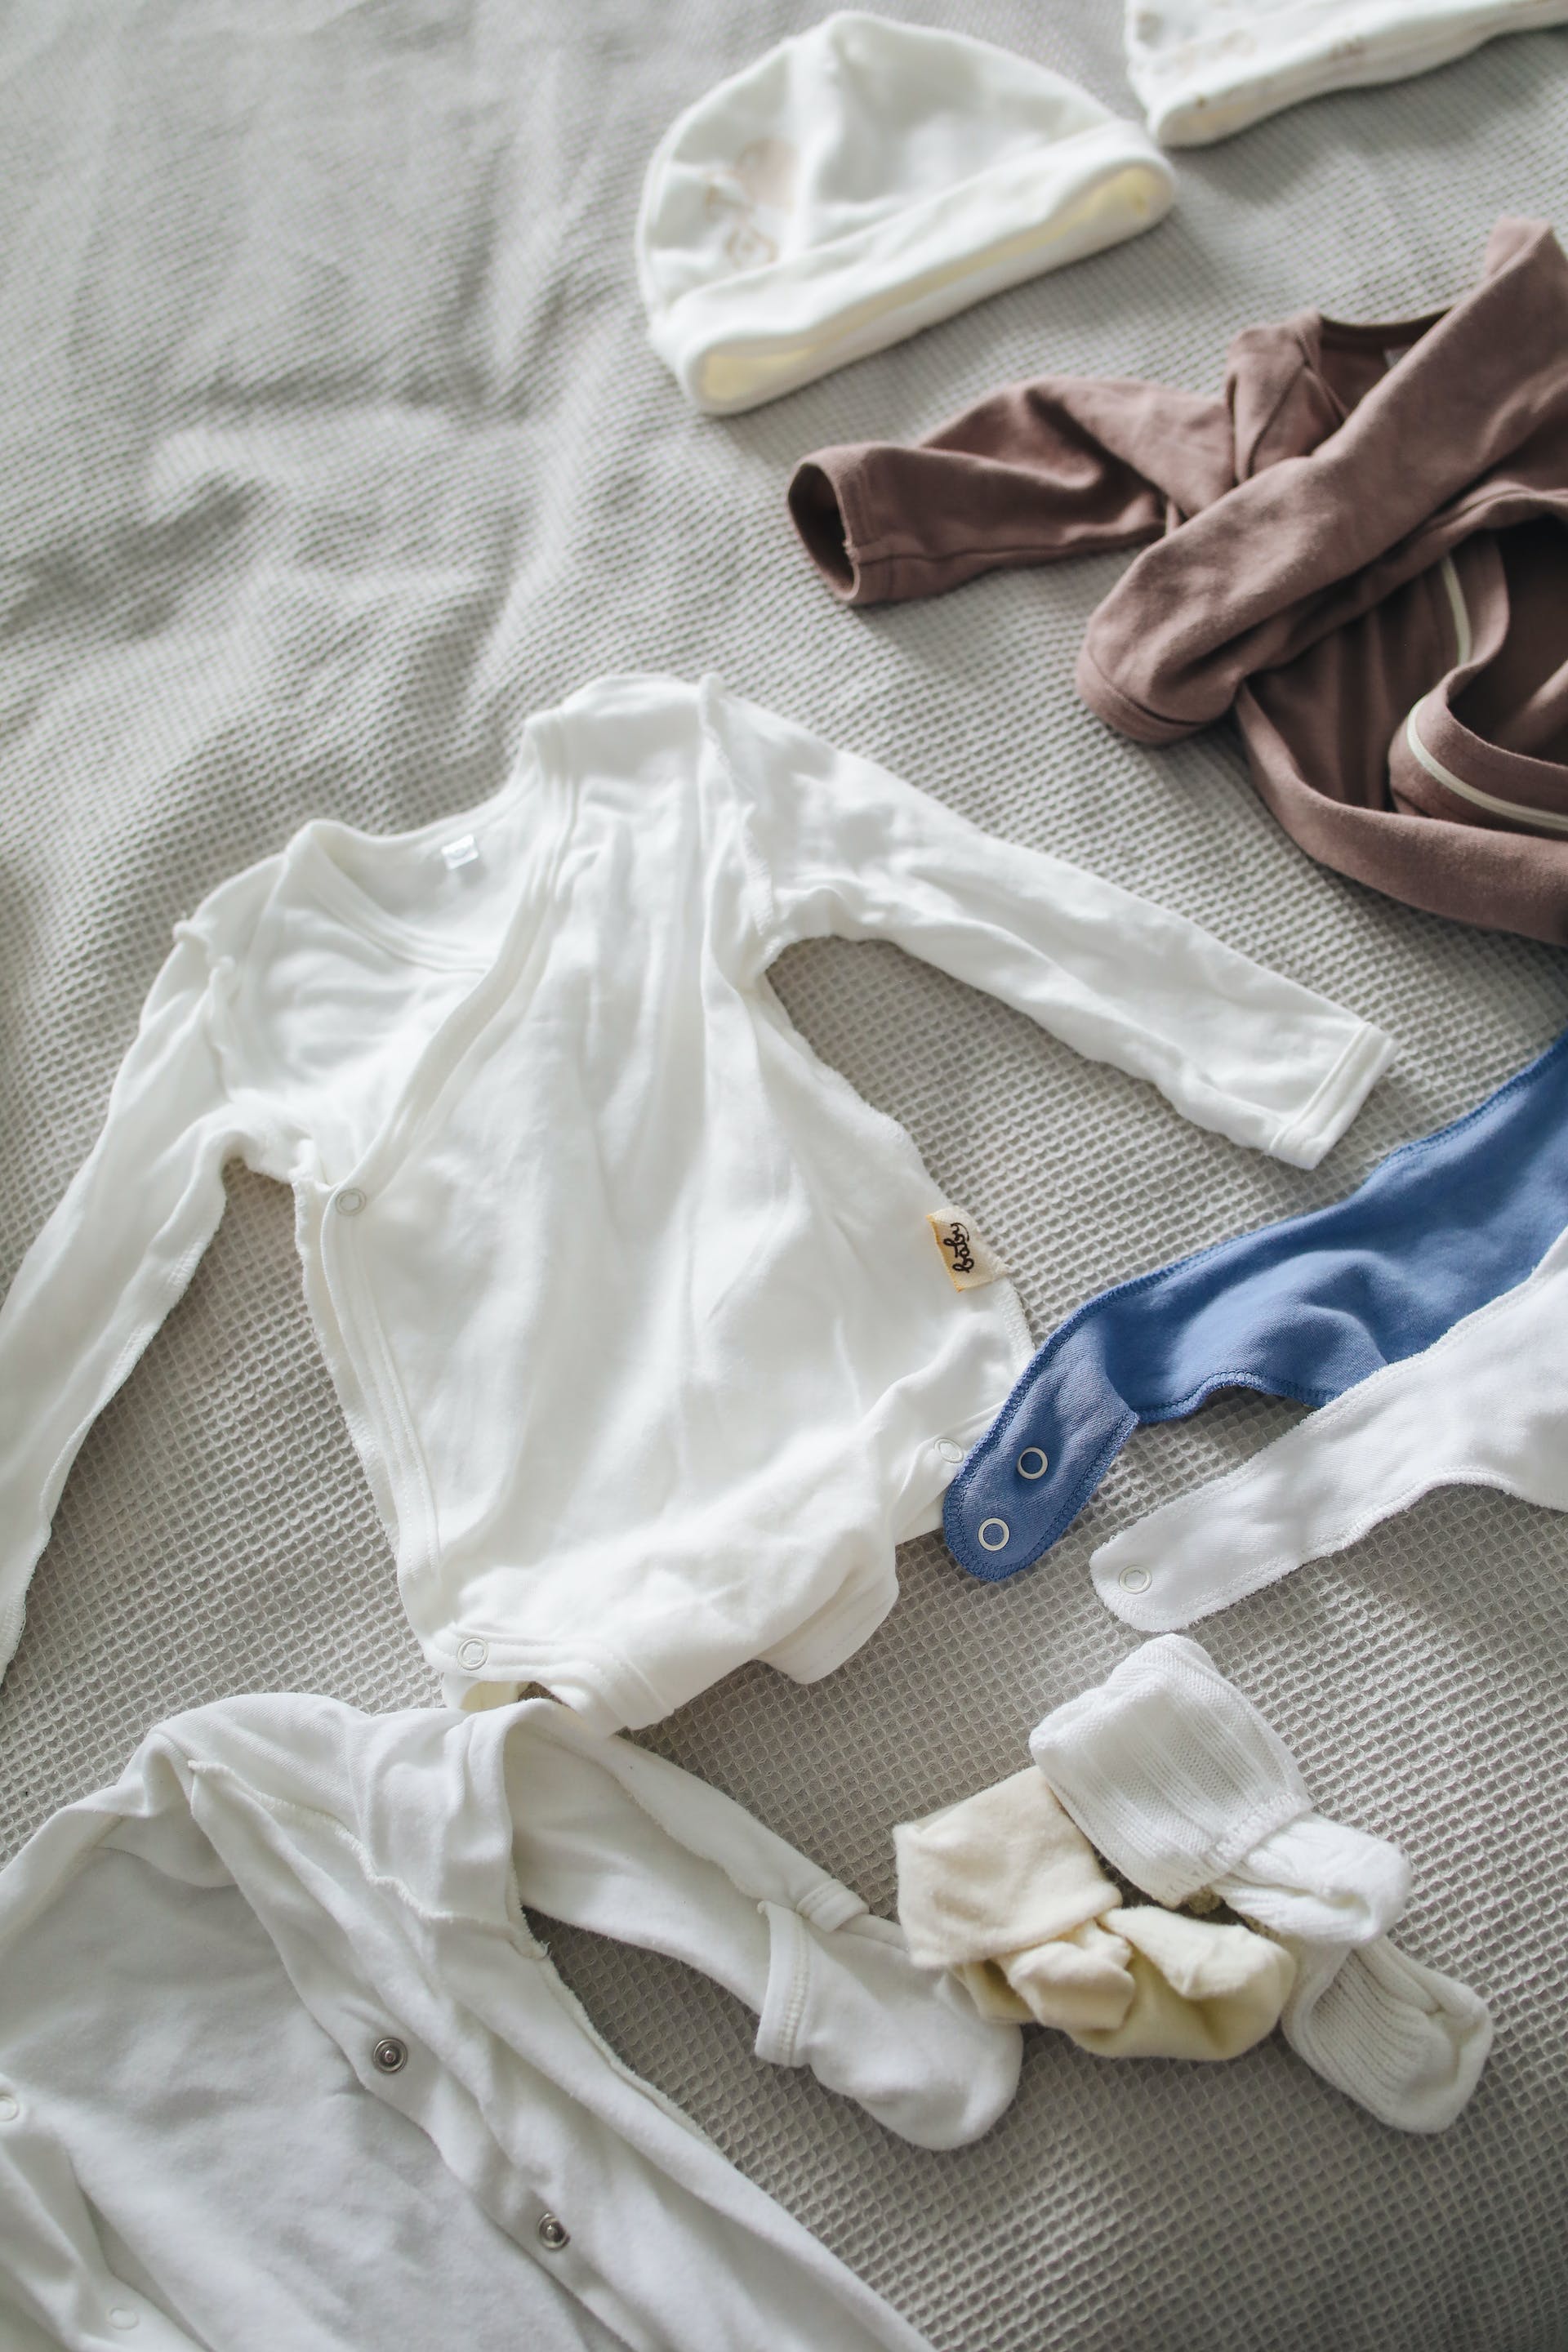 Baby clothes laid out on a surface | Source: Pexels